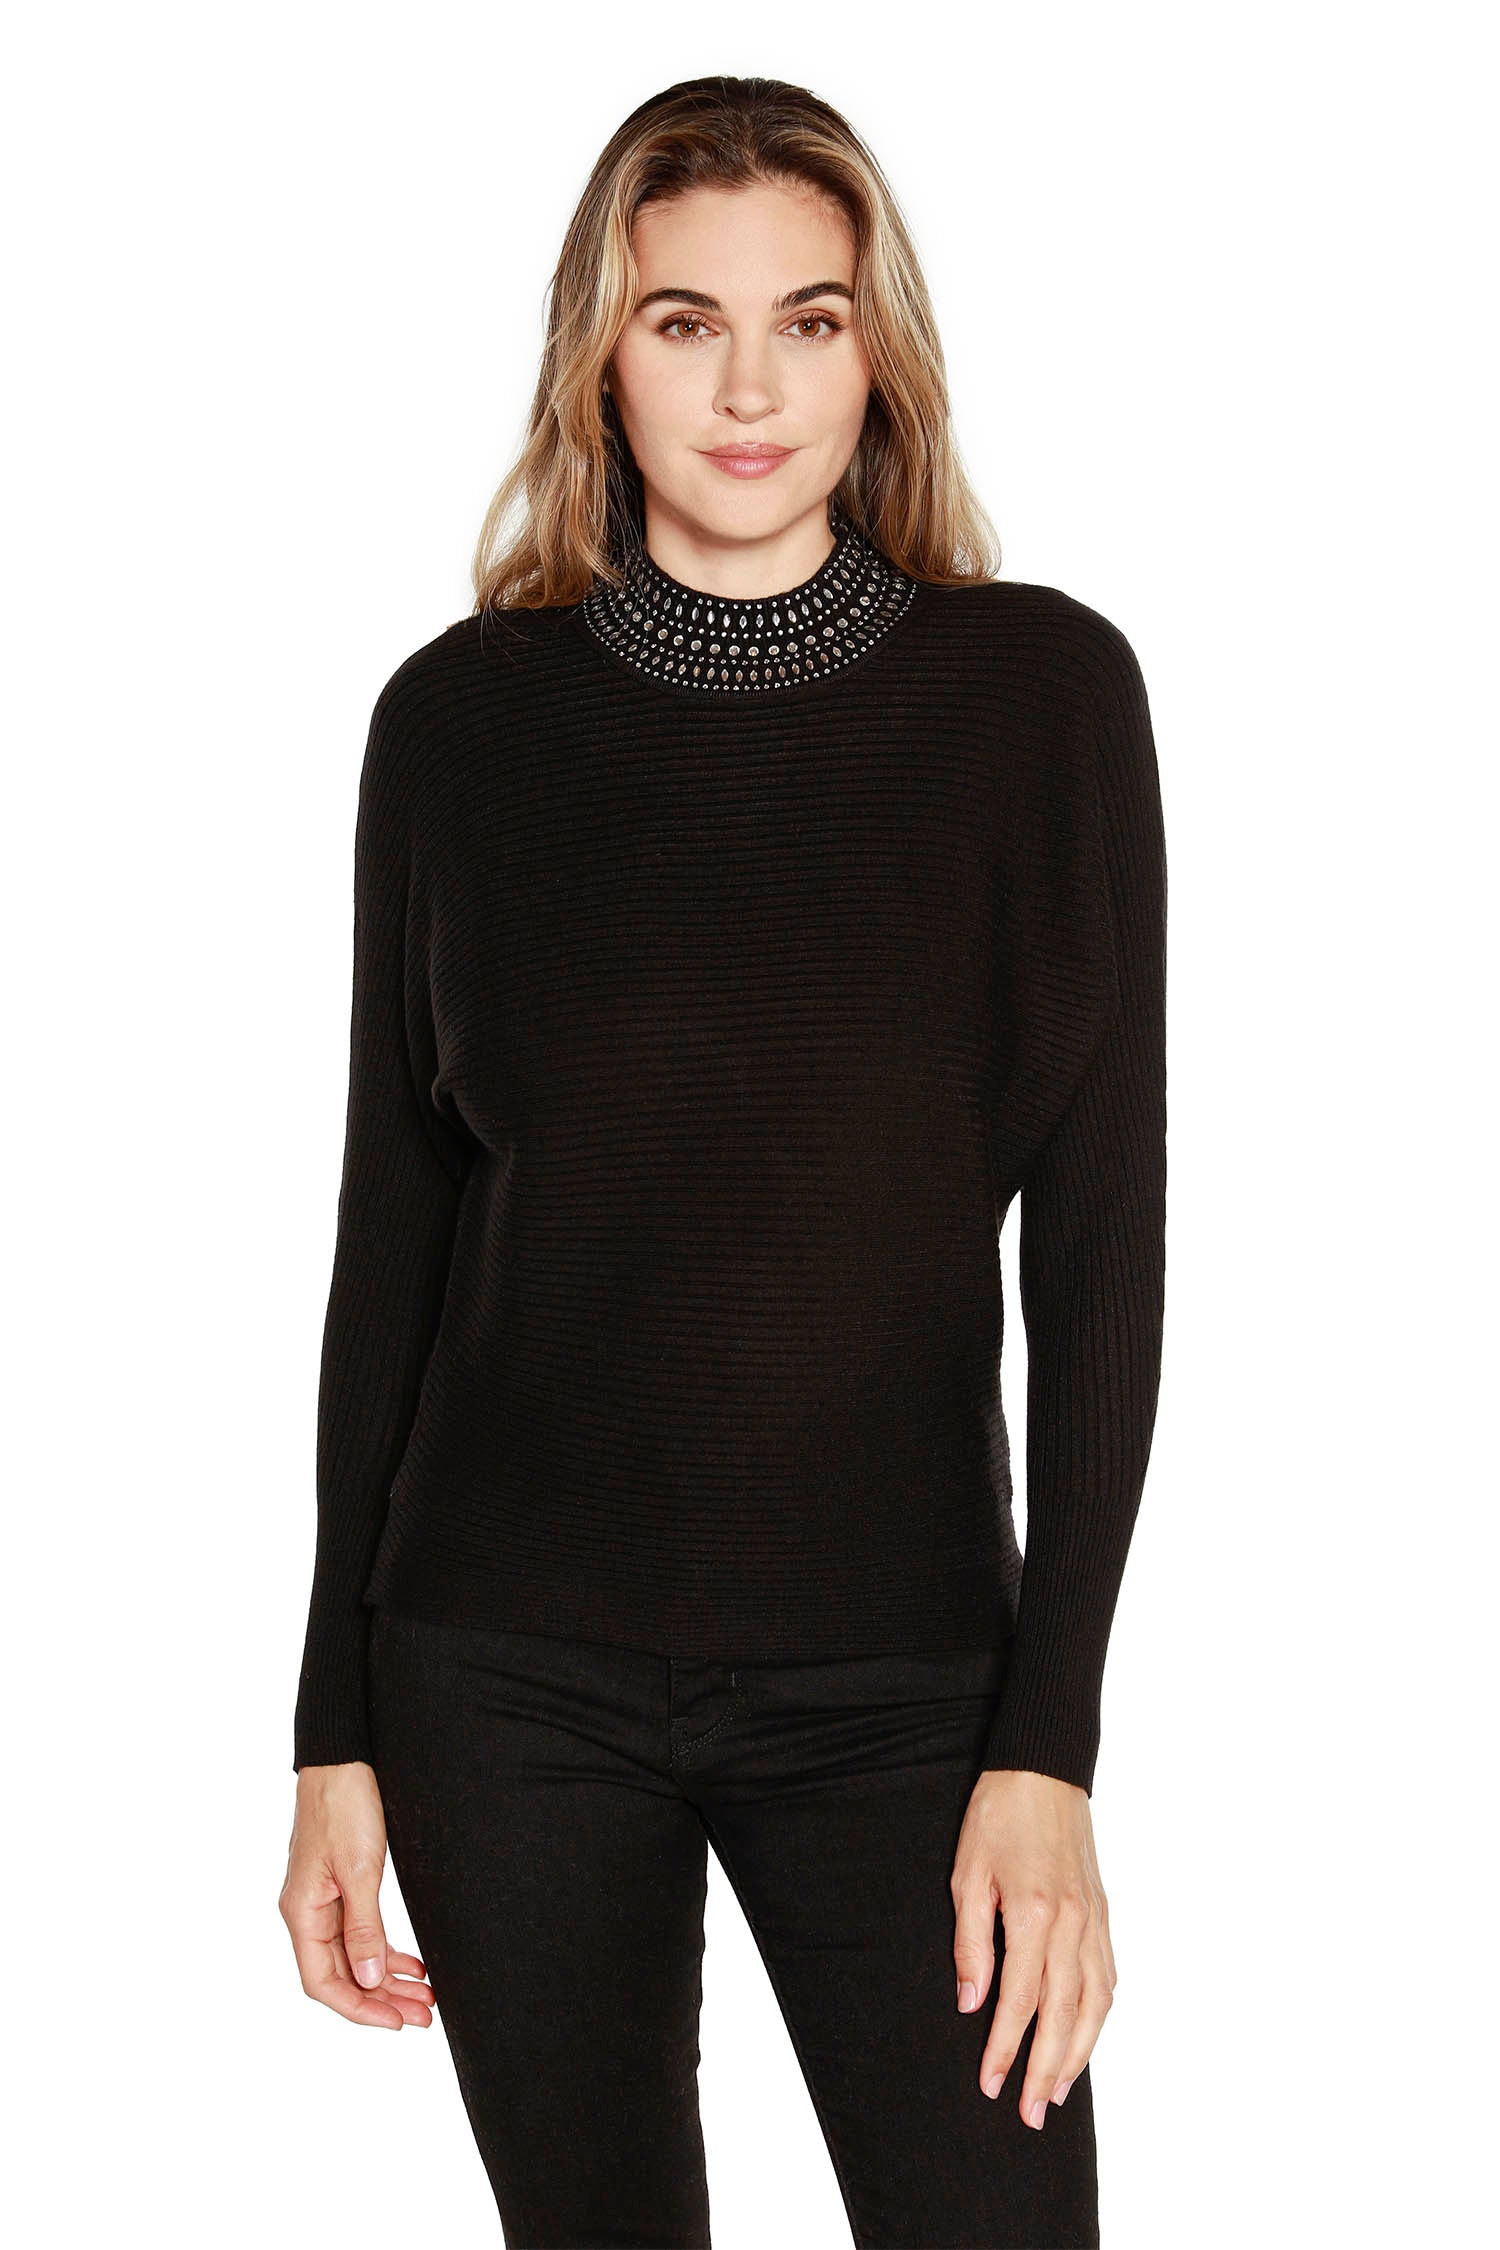 Women's Ribbed Knit Dolman with Mock Neck and Rhinestone Detailing